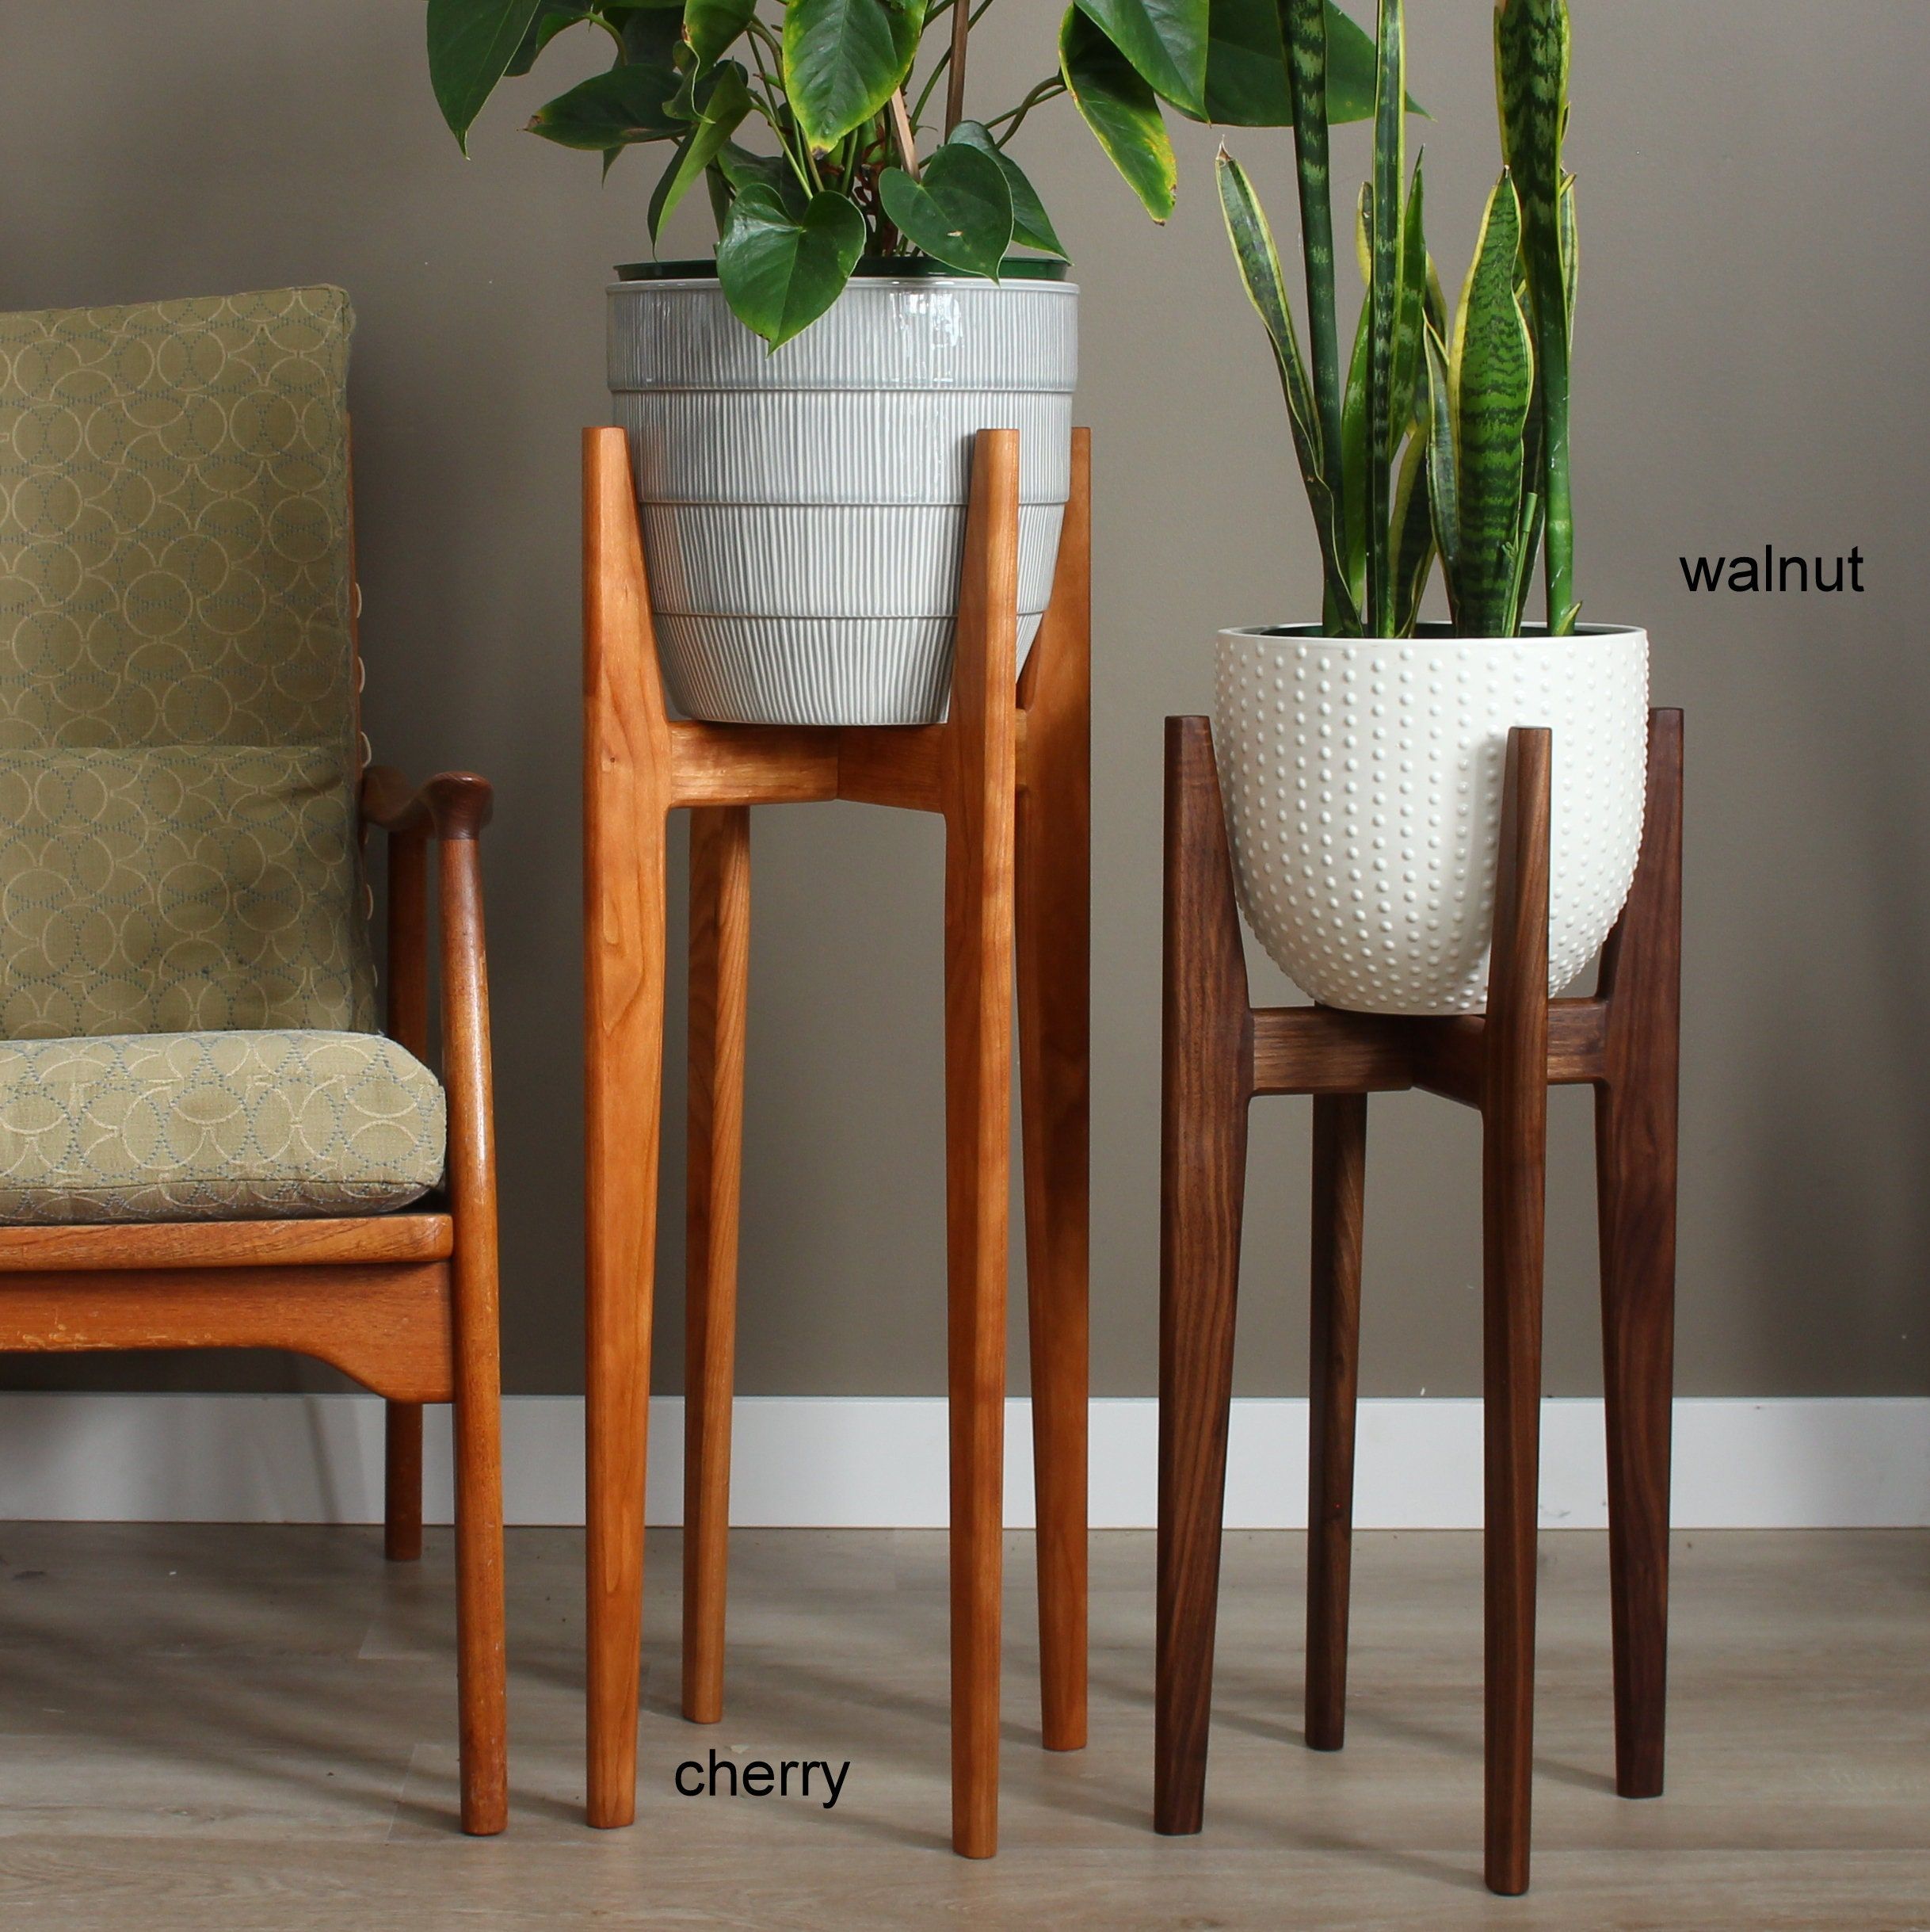 Mid Century Modern Plant Stand Our Original Design Indoor – Etsy Pertaining To Wood Plant Stands (View 8 of 15)